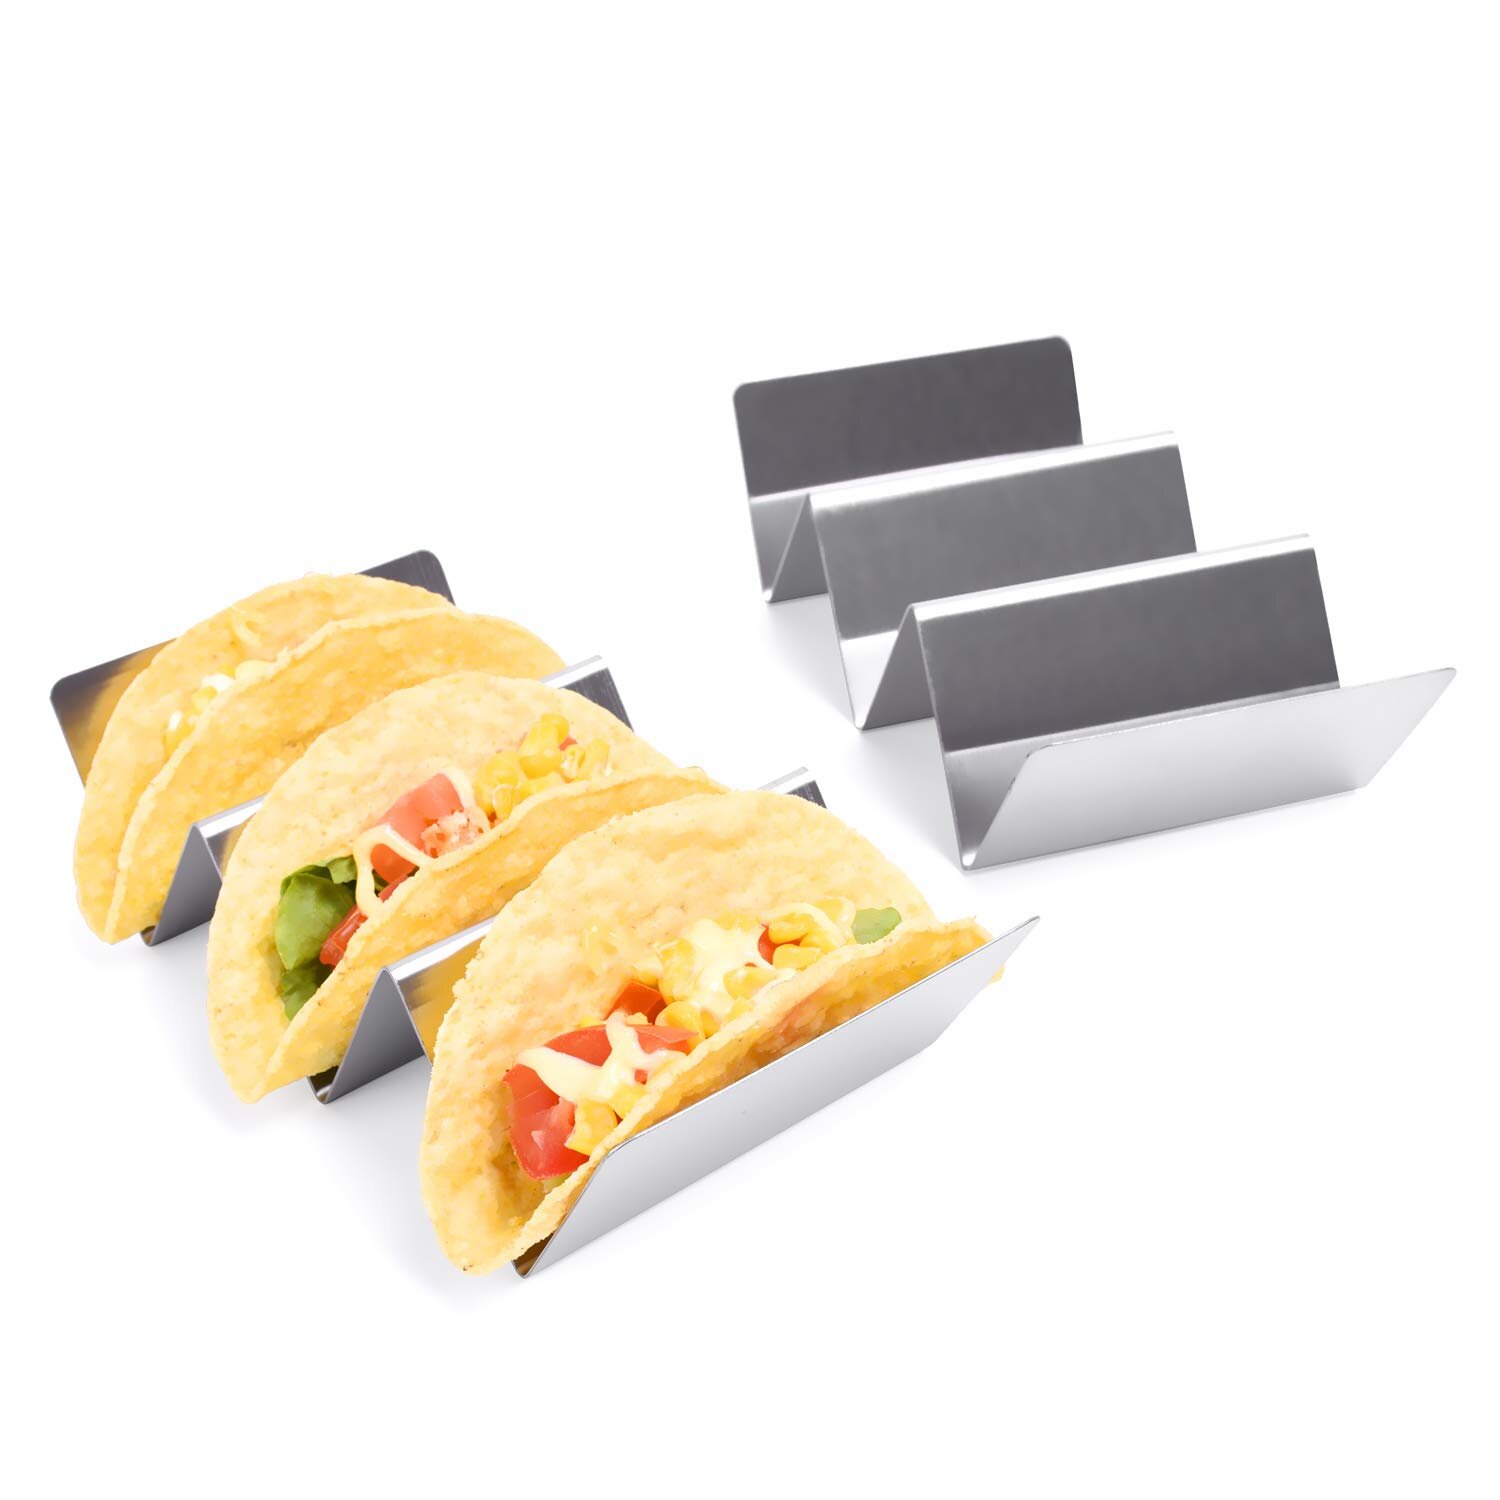 4 Pack Stainless Steel Taco Holder Stand Safe Rack Tray for Dishwasher Oven Save 